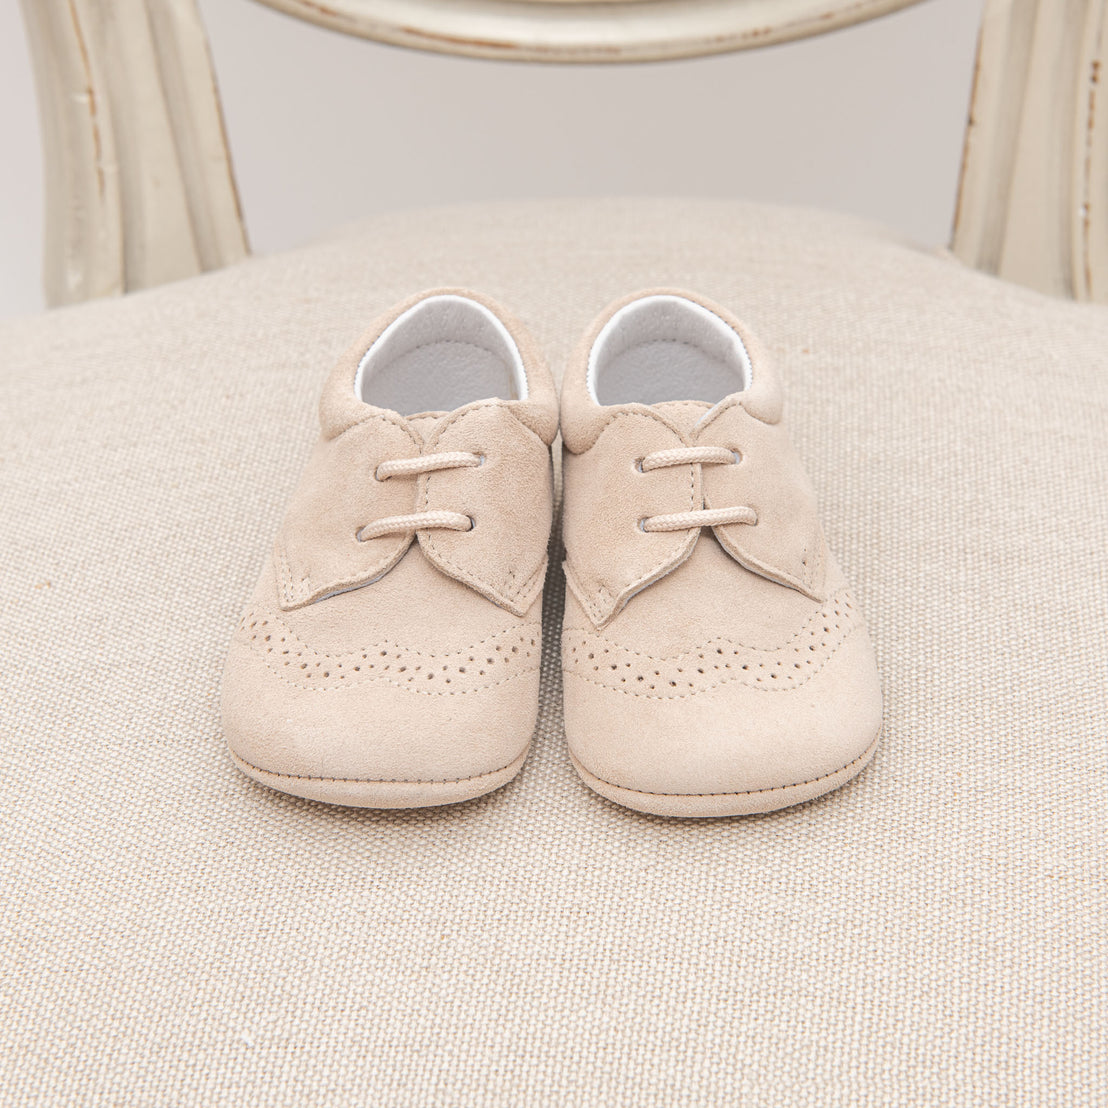 A pair of small beige handmade Camel Suede Shoes with laces, placed neatly on a textured cream cushion and set against a vintage-style wooden chair.